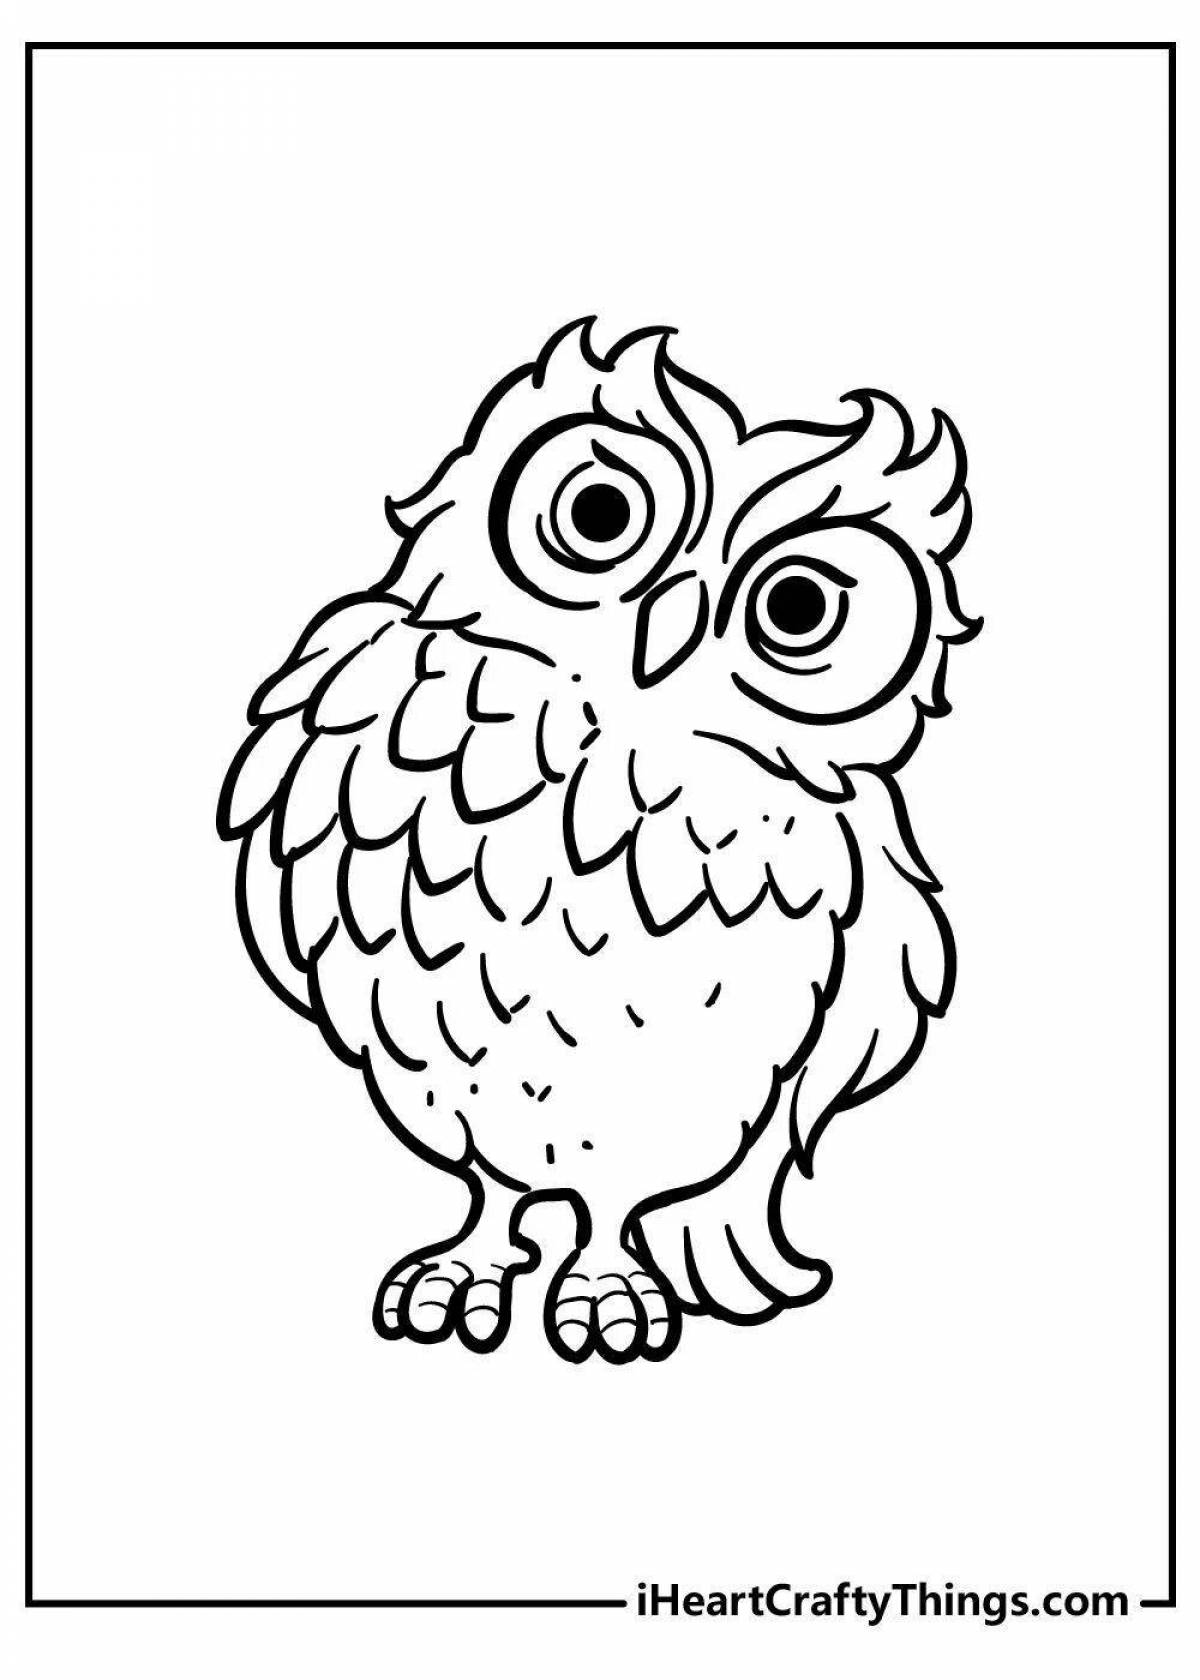 Colorful owl coloring page for 6-7 year olds